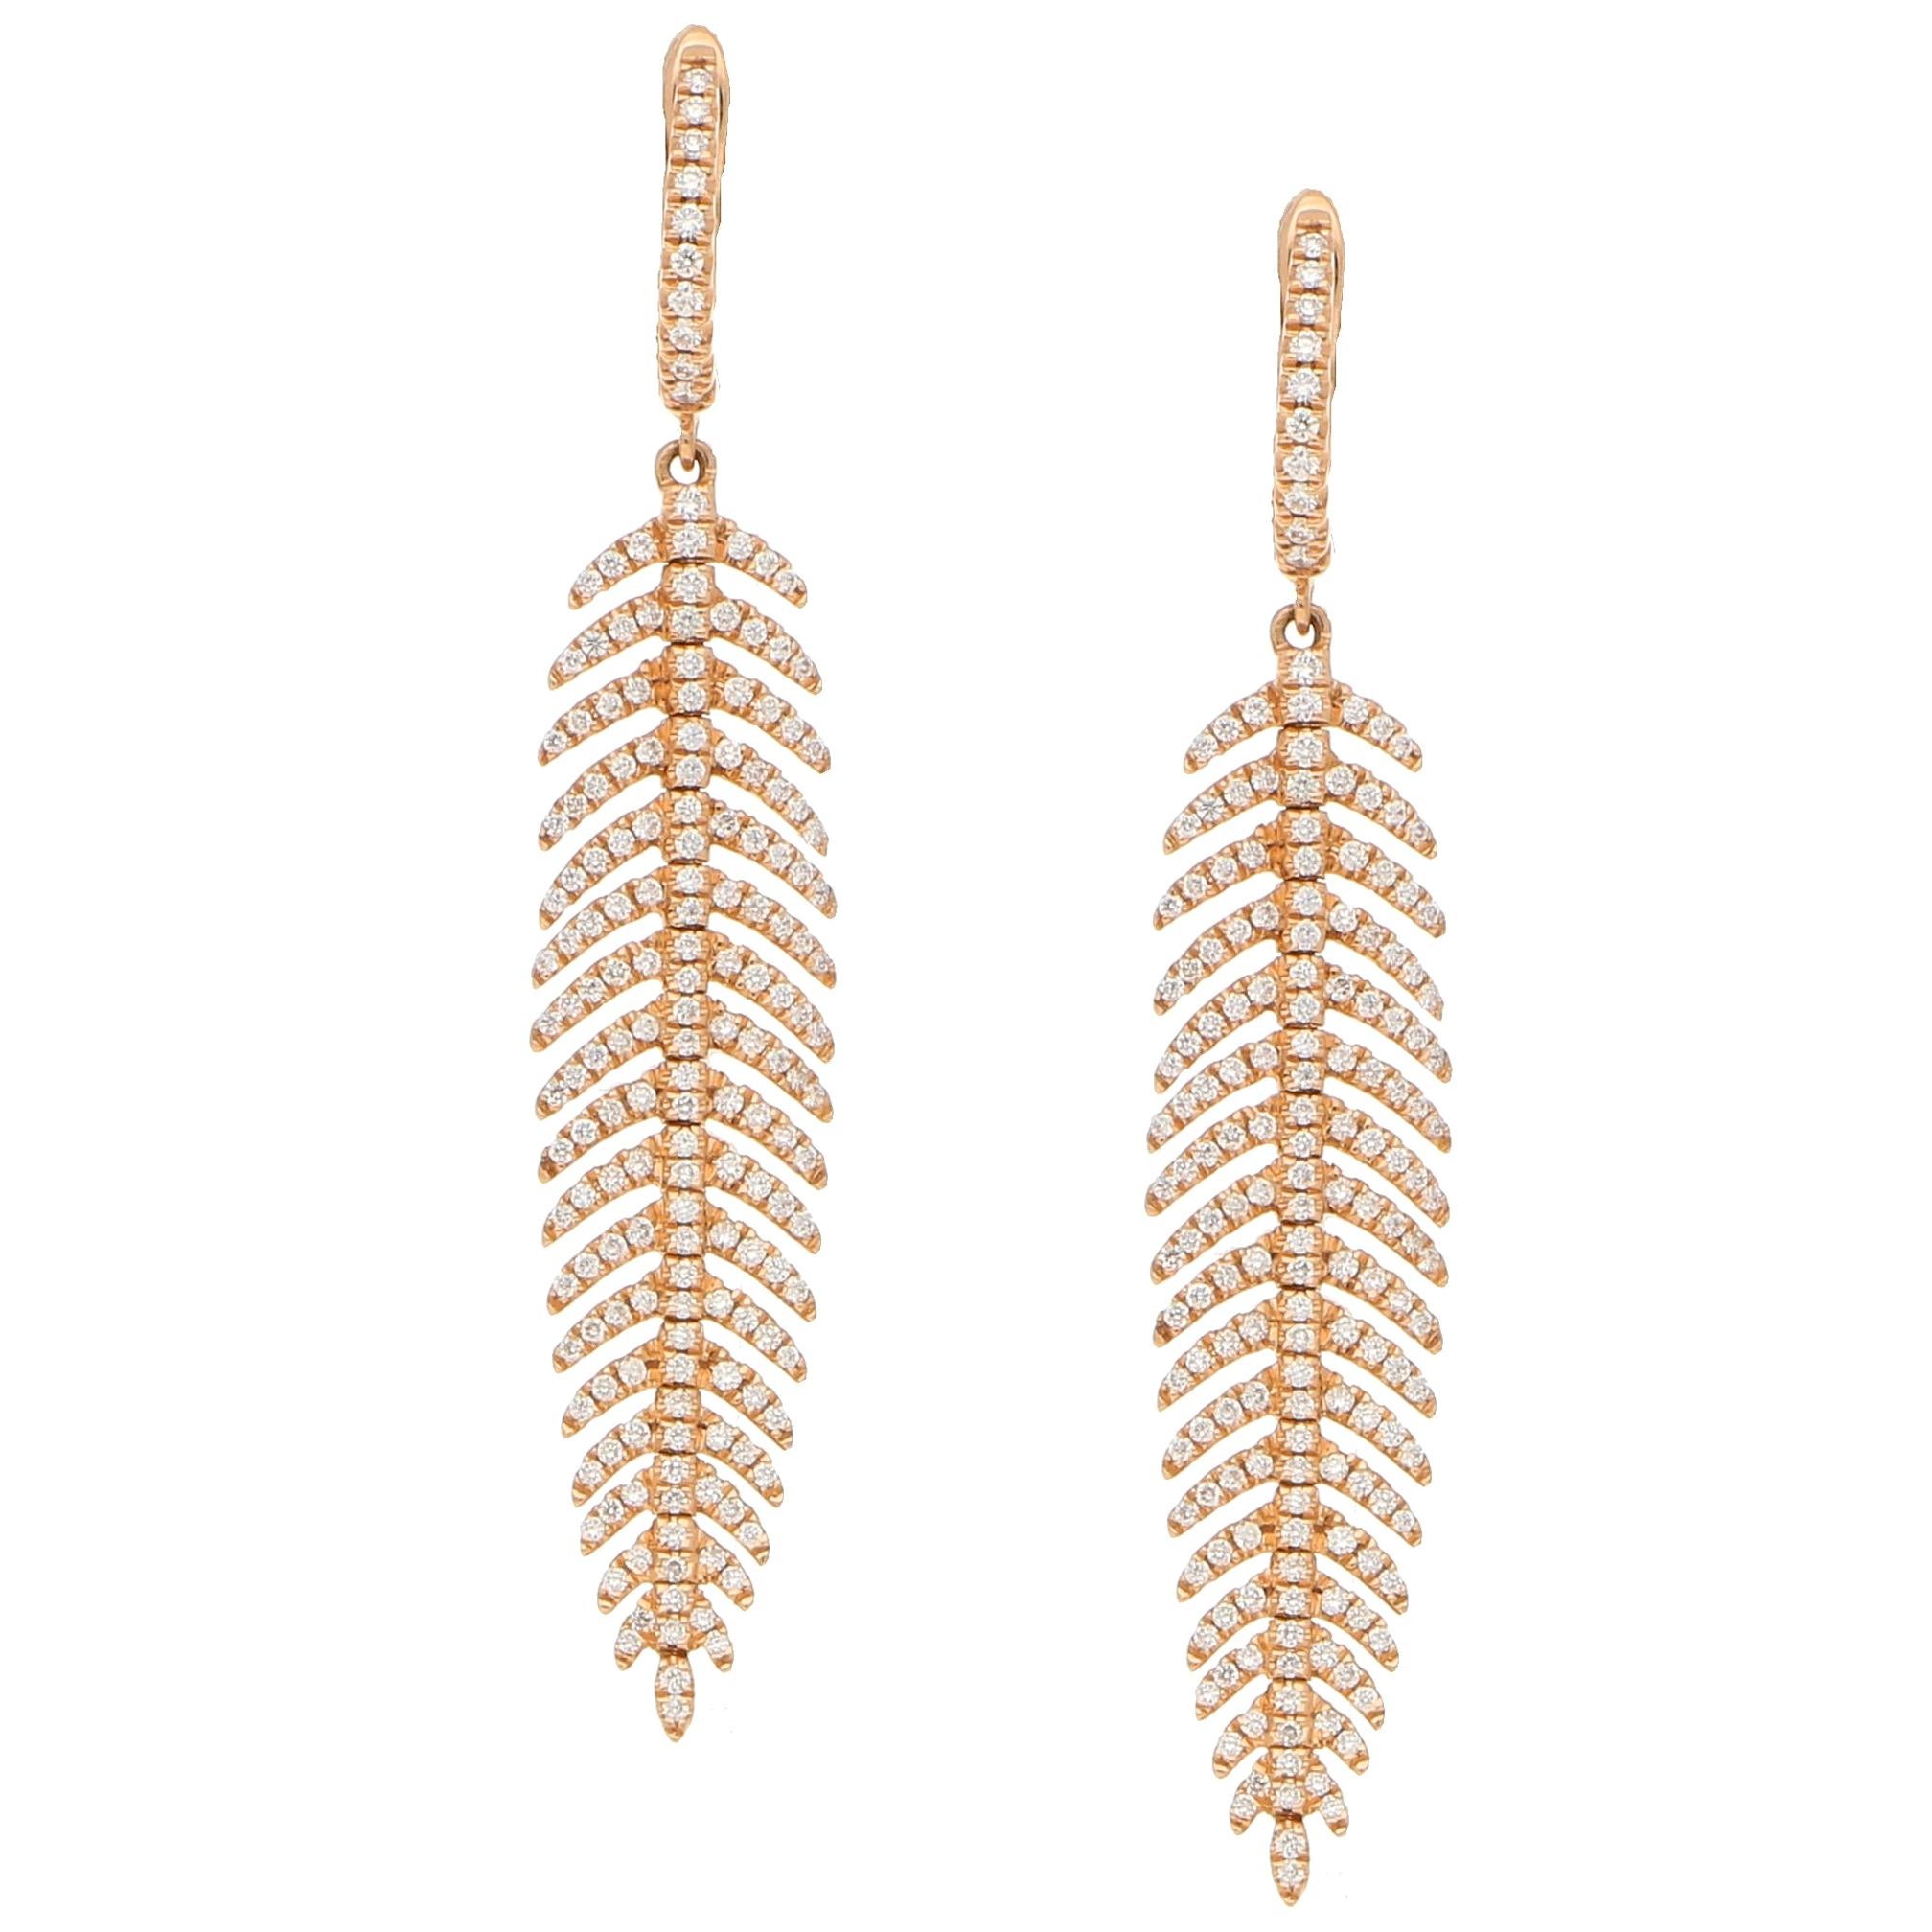 Articulated Diamond Drop Feather Earrings in 18 Karat Rose Gold